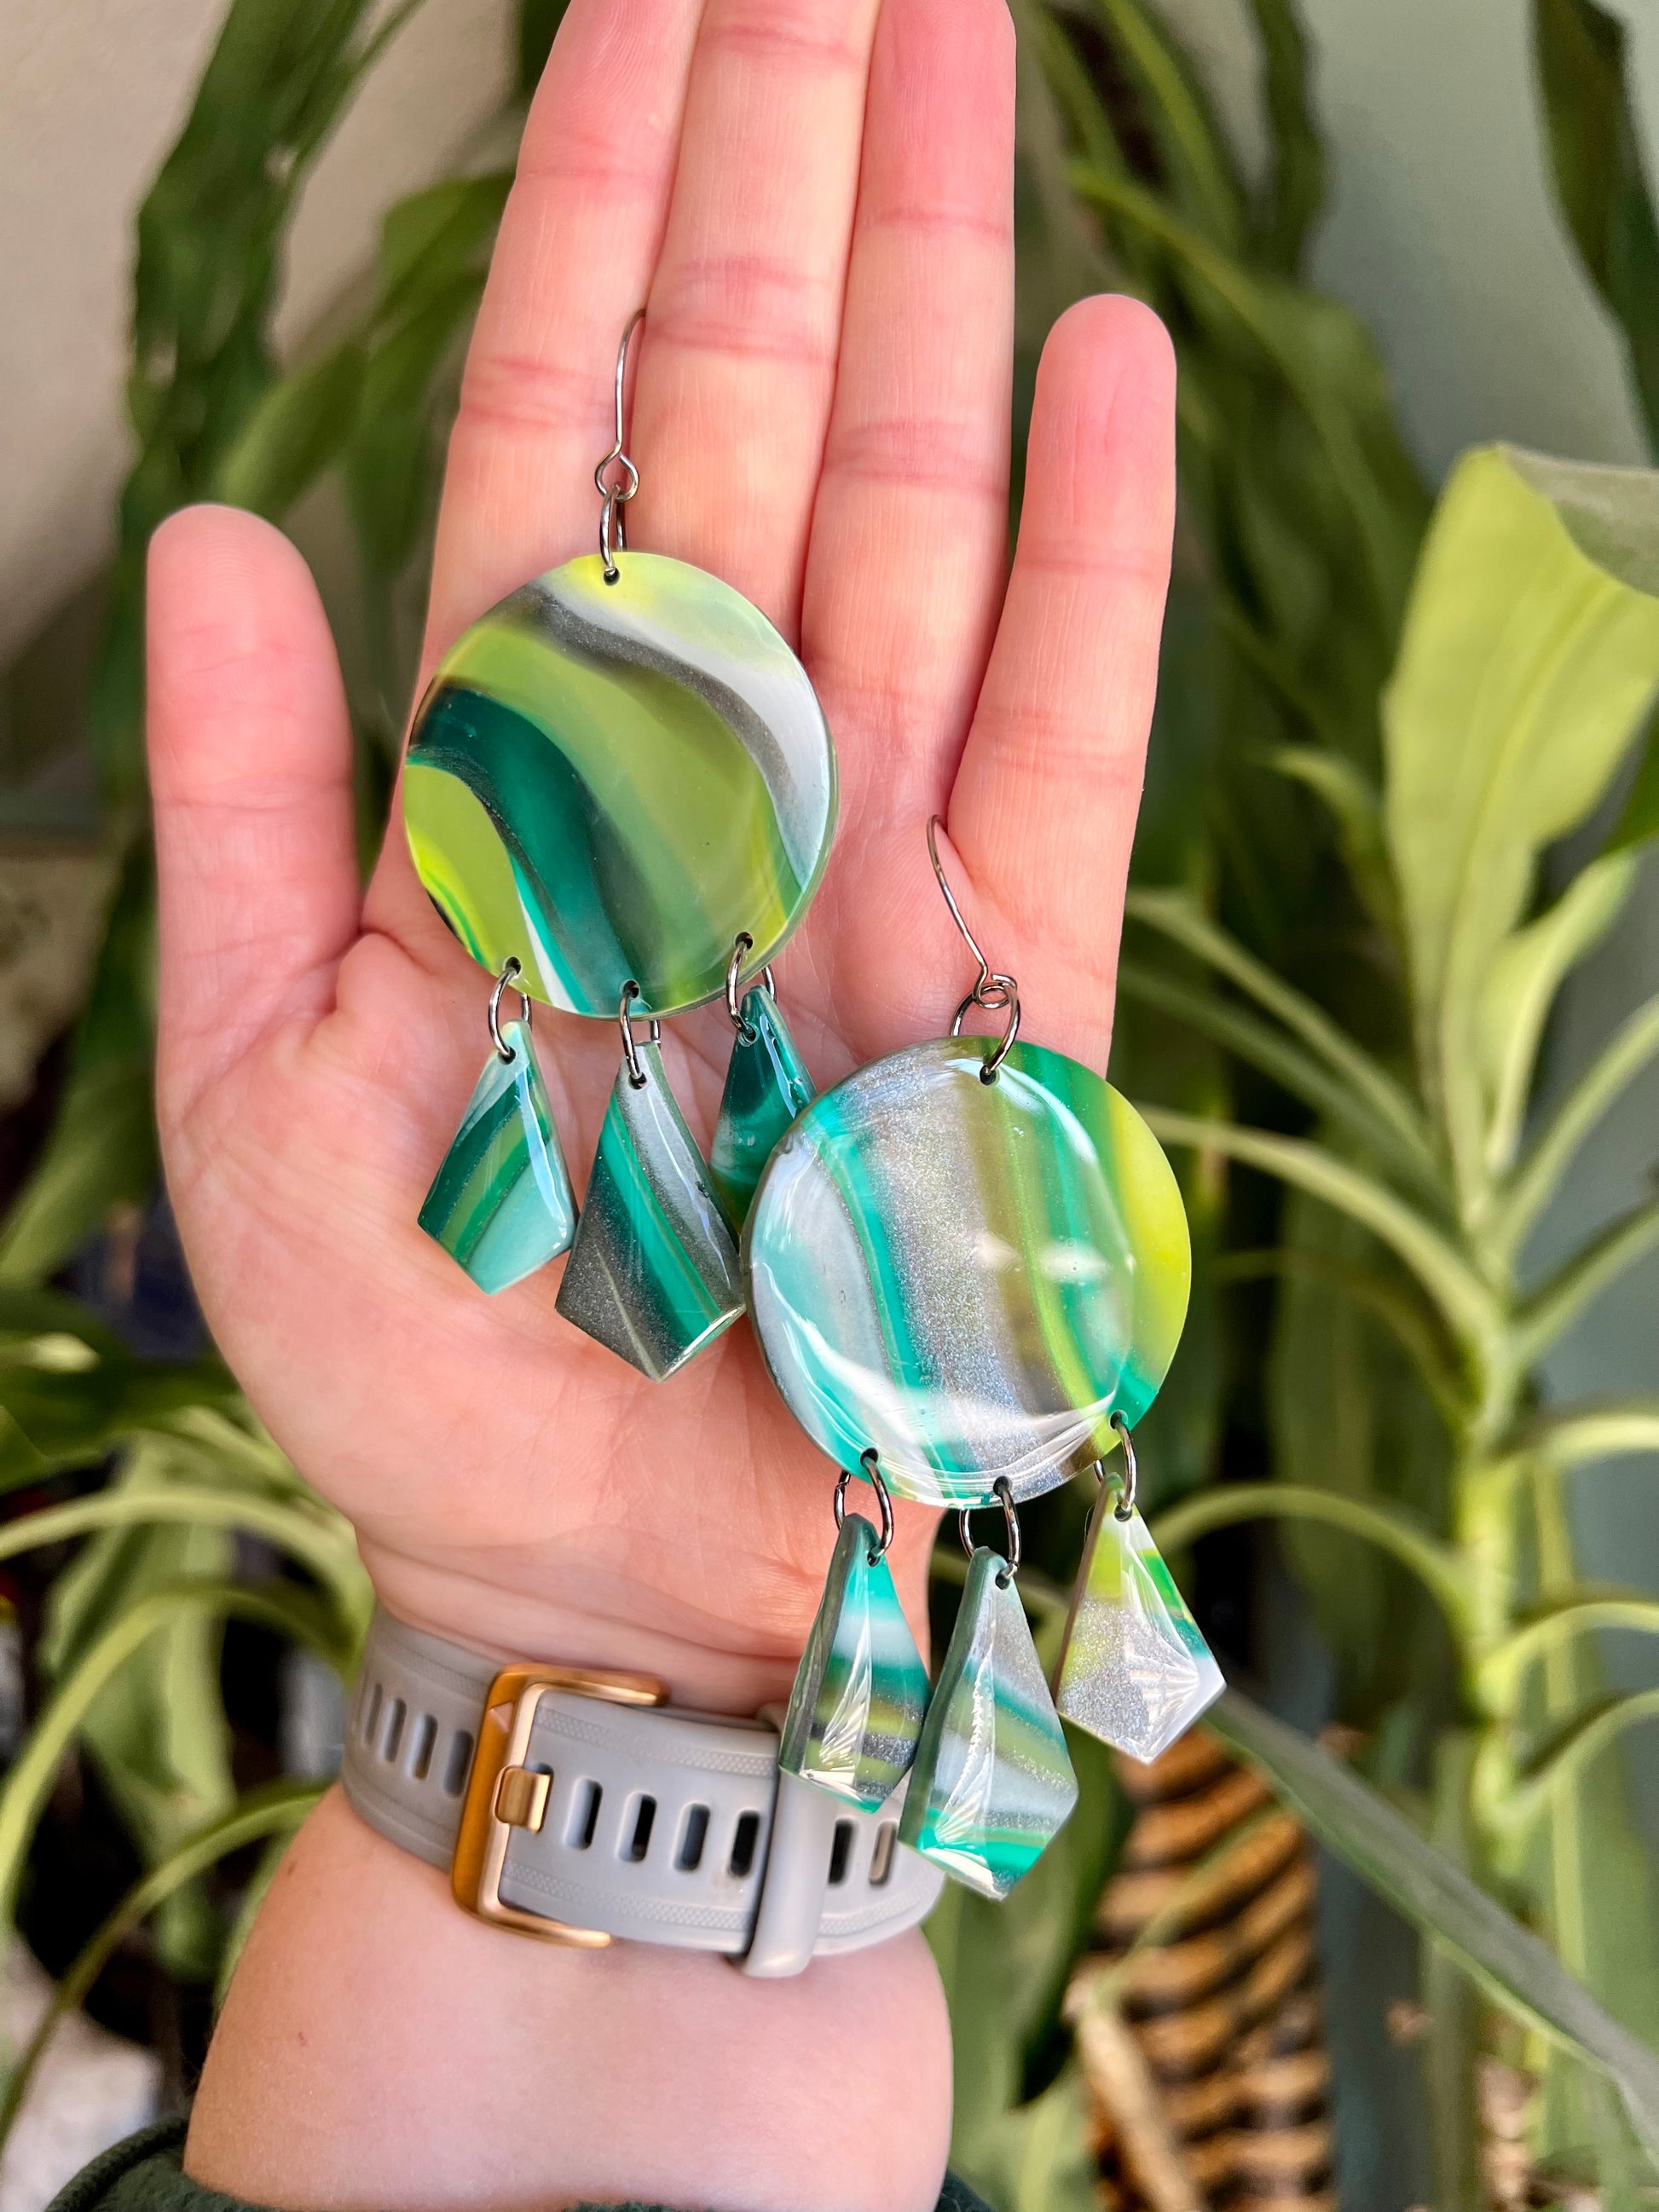 Celebrate the vitality of nature with our handmade polymer clay earrings, crafted in shades of green, silver, and white. Symbolizing renewal and immortality, each pair embodies the earth's energy, offering a one-of-a-kind expression of natural beauty.